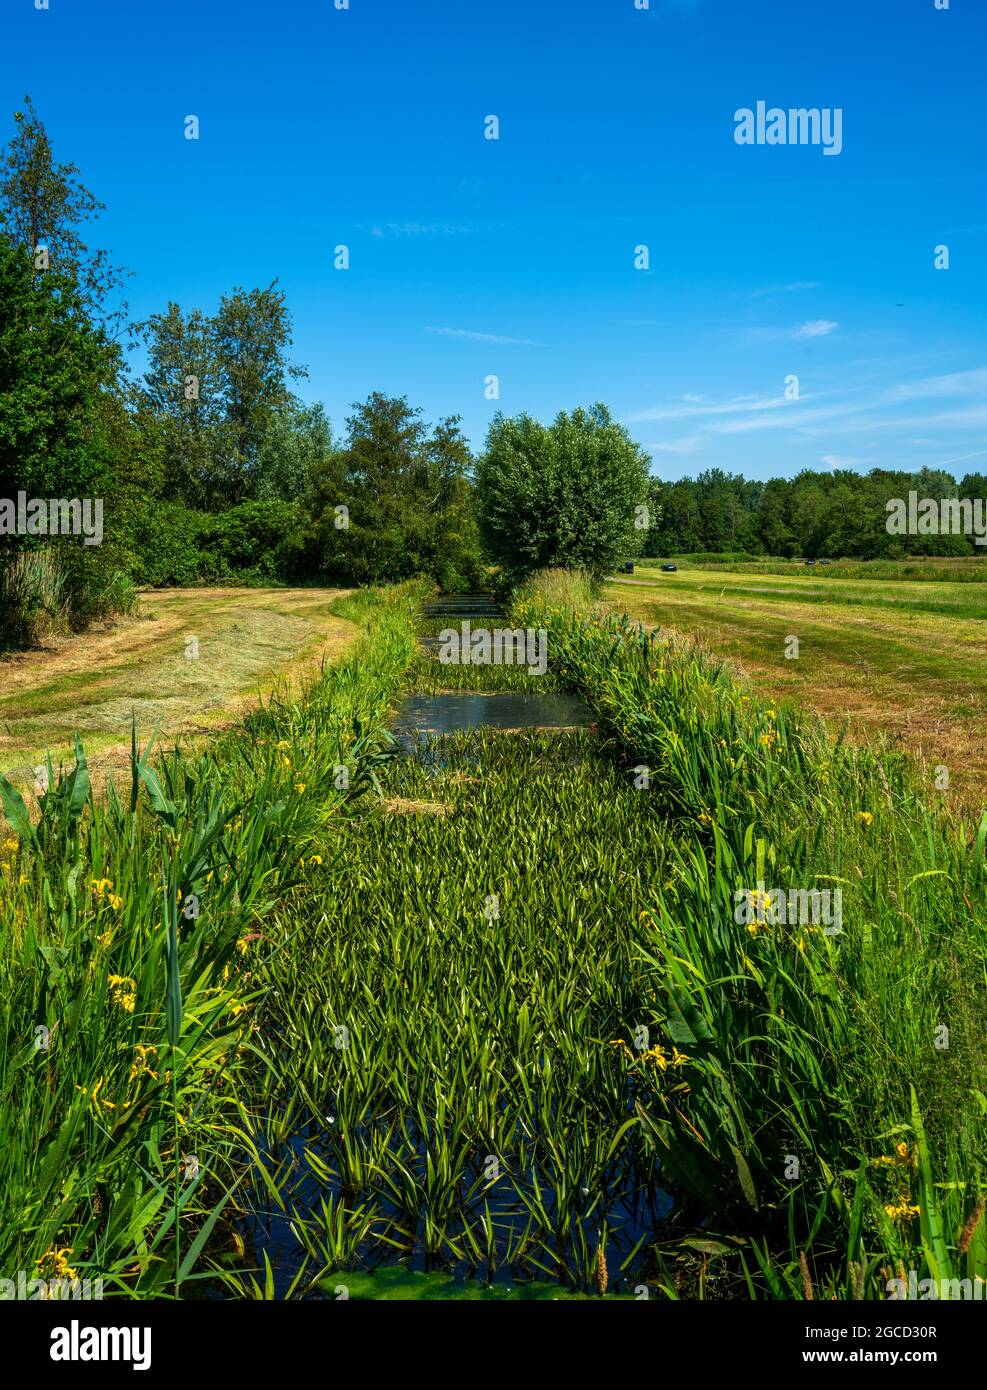 Ditch with Water soldiers (Stratiotes aloides) Stock Photo